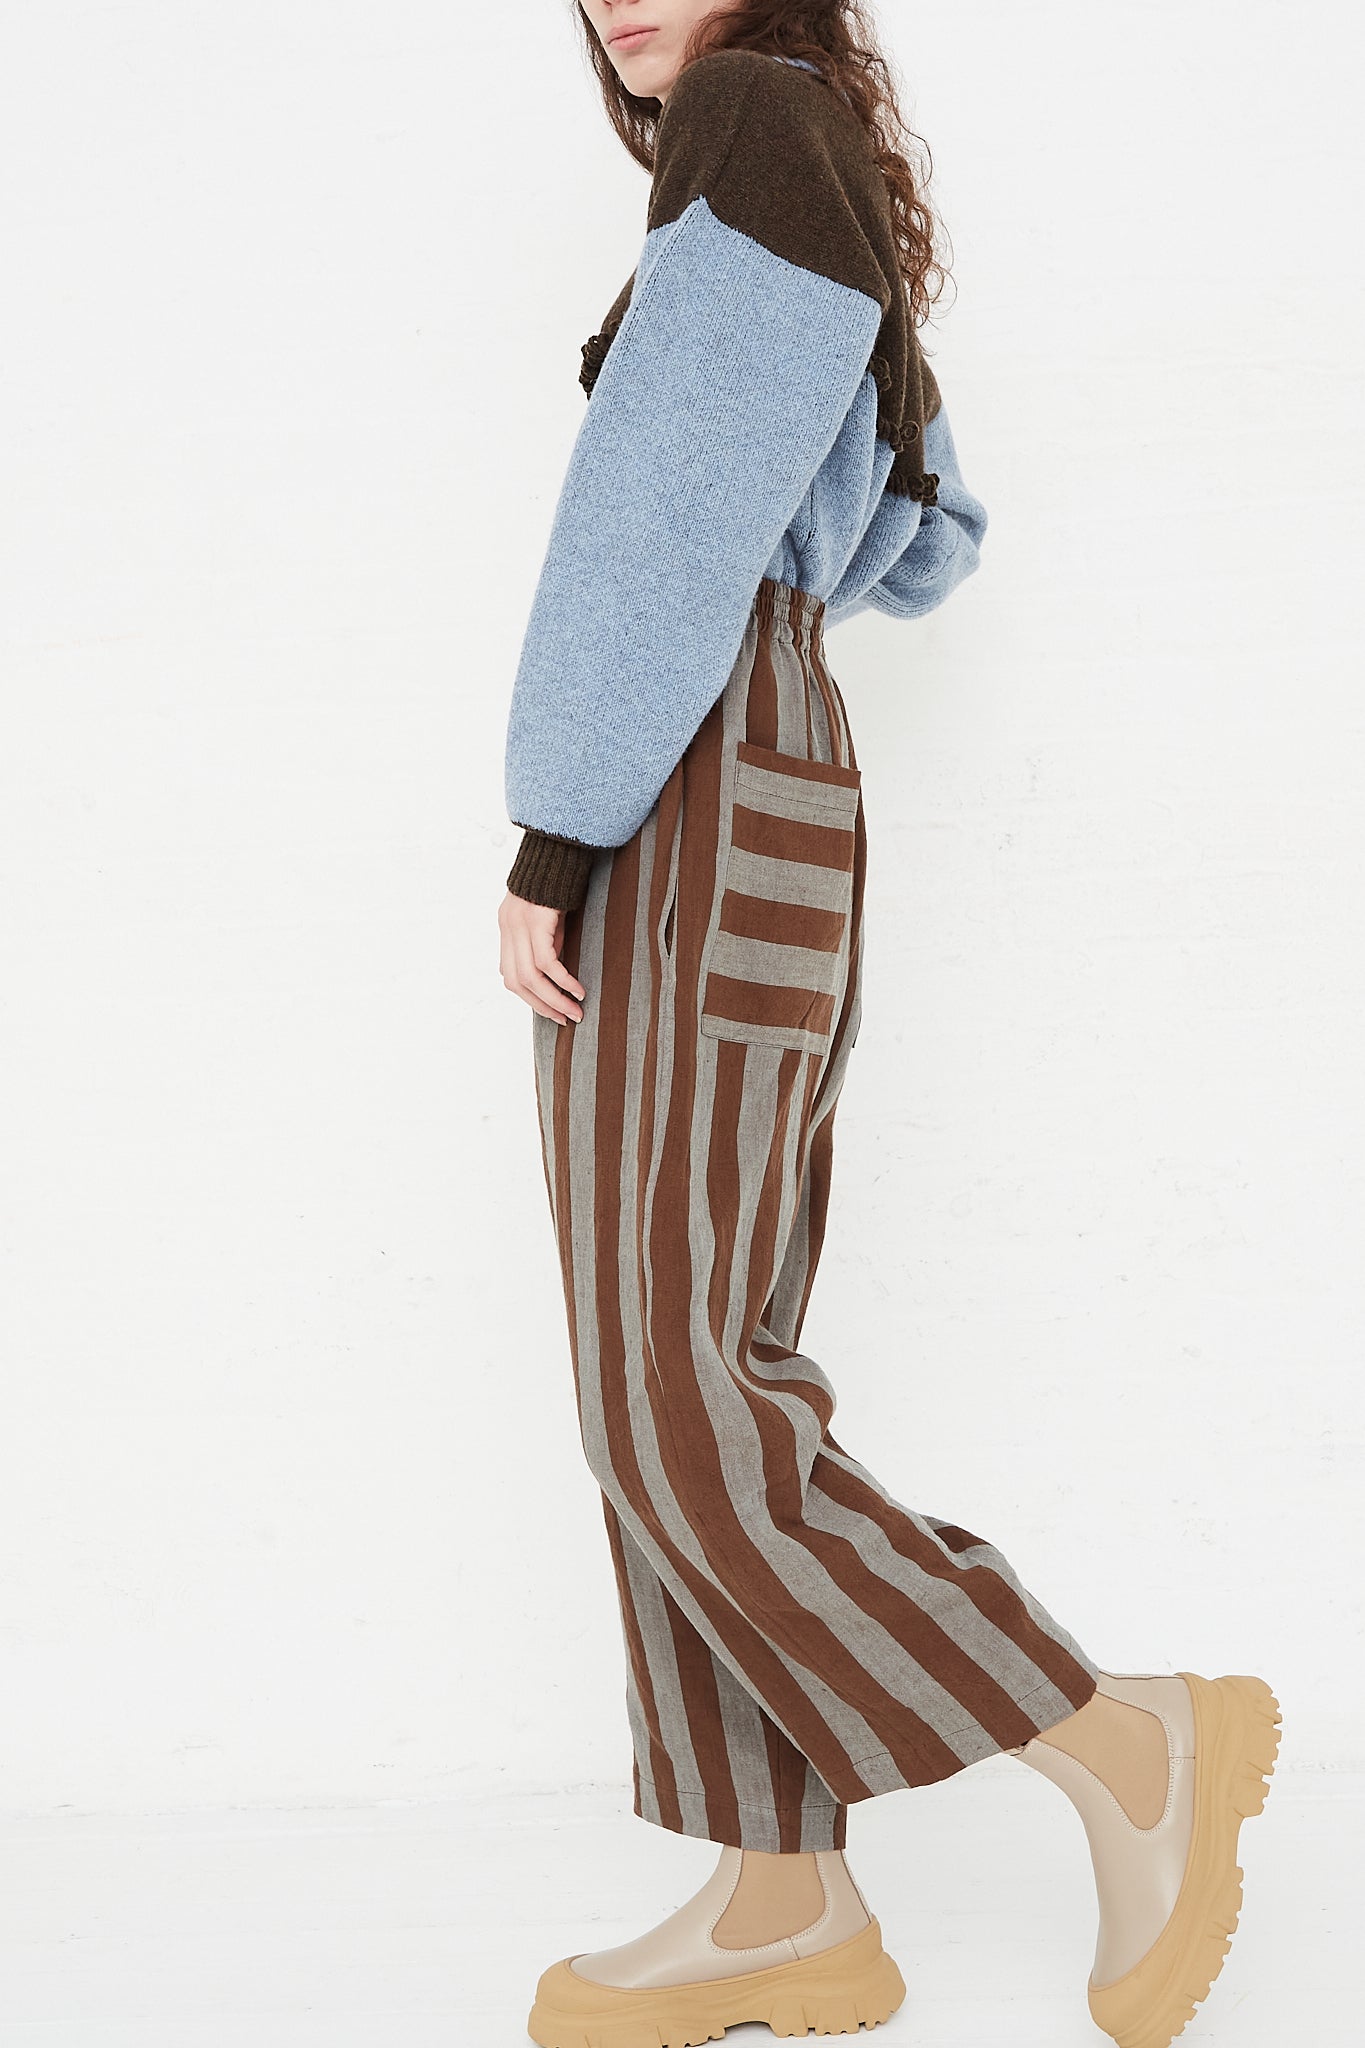 A model wearing a high waist trouser in a striped Irish linen. Brown and blue stripe. Features an elasticated waist and a wide straight leg. Full length and side view of model highlight full pant, sweater and boots. Showing pocket details. Designed by Cawley - Oroboro Store